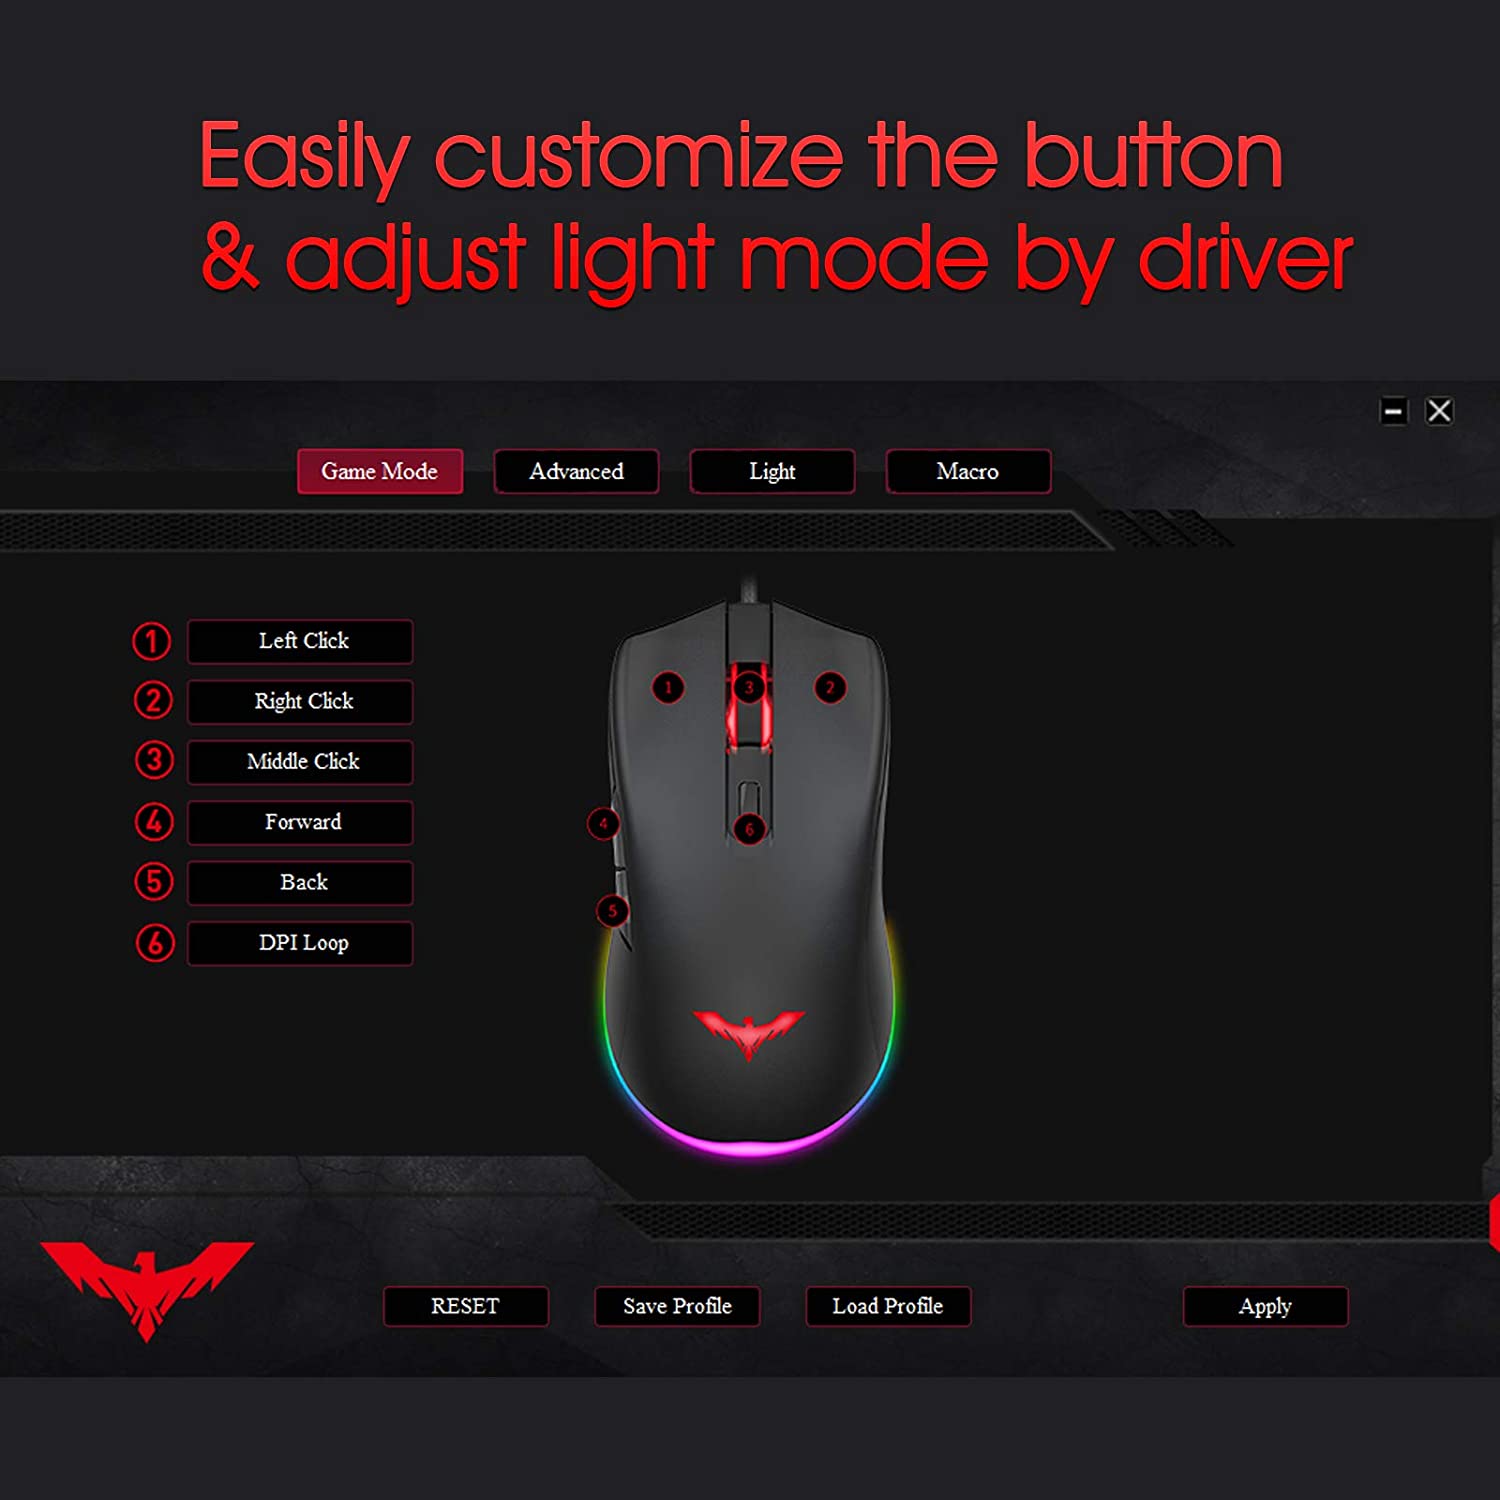 HAVIT MS732 RGB Gaming Mouse with 6400 DPI, Programmable, 7 Color Backlights, 6 Buttons (2020 Version)